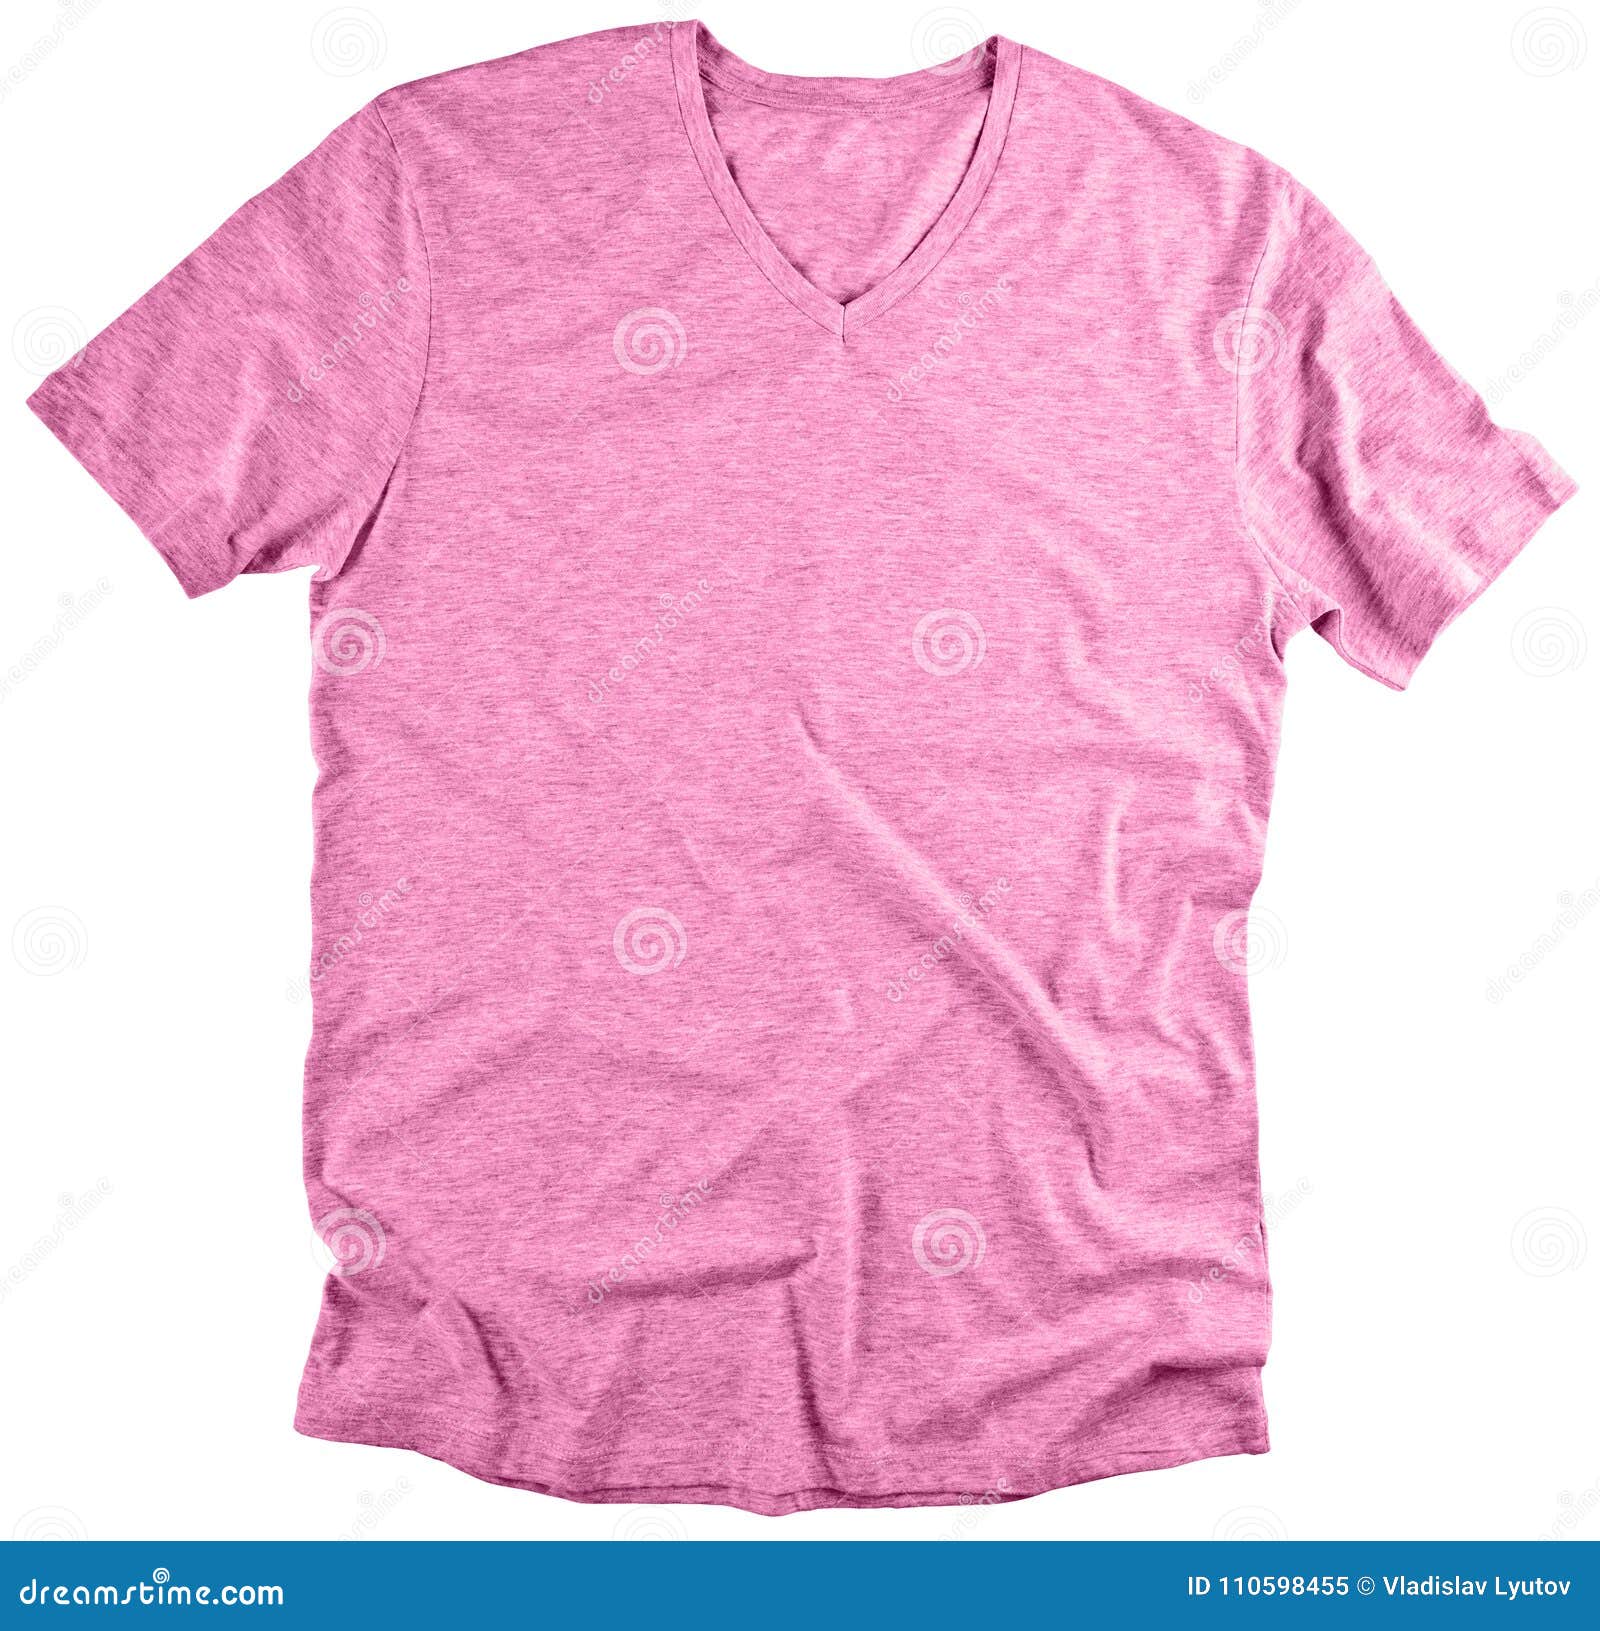 Front View of Pink T-shirt on White Background. Stock Image - Image of ...